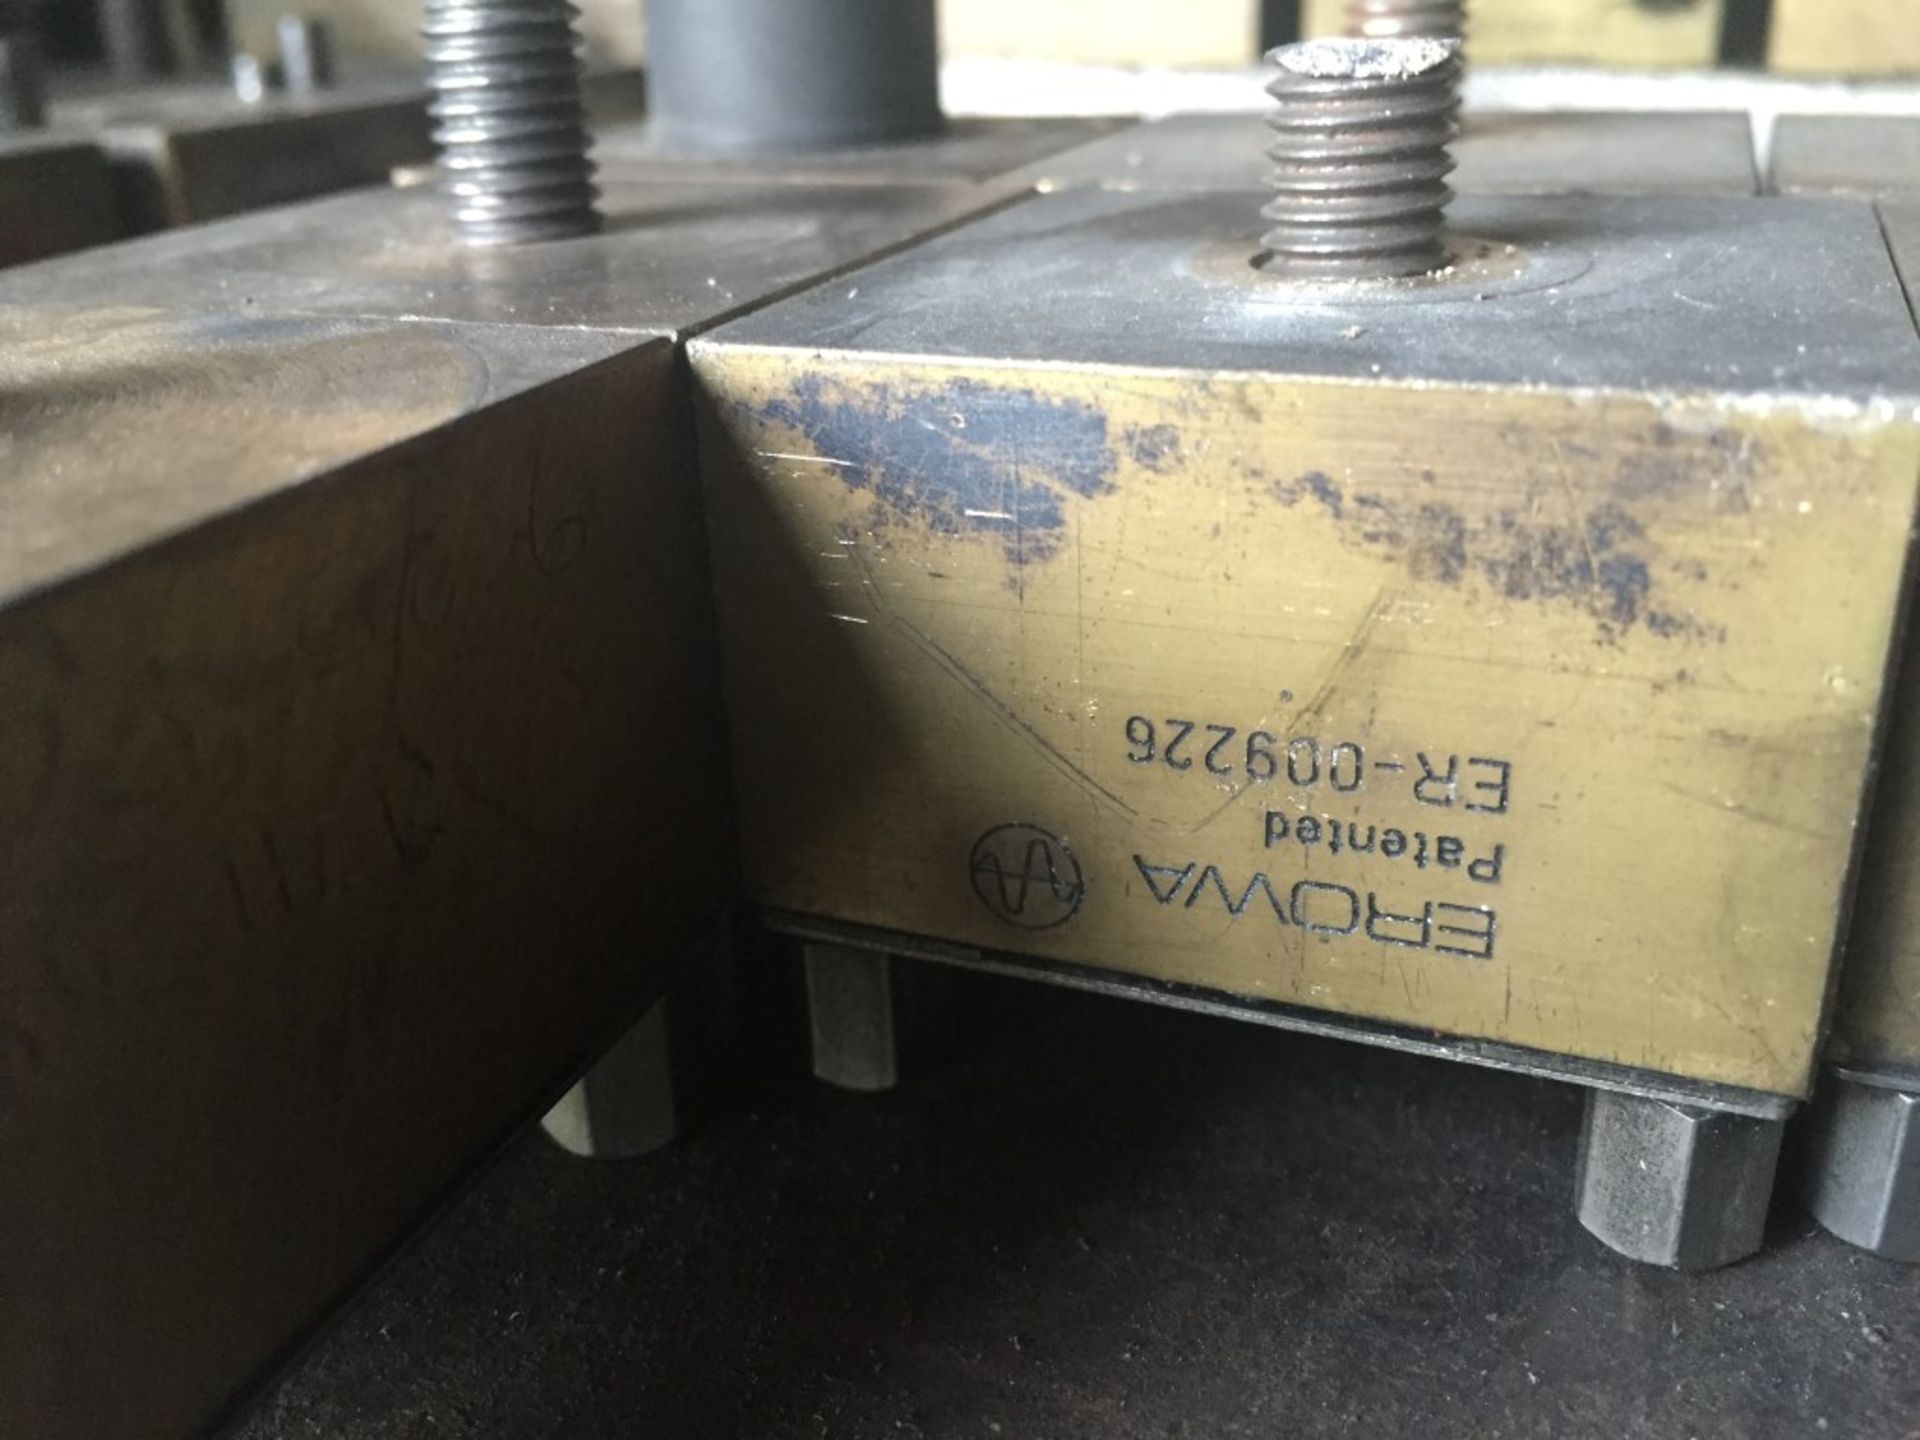 12 x Erowa ER-009226 ITS Uniblank to mount electrodes and workpieces of various shapes. - Image 6 of 7